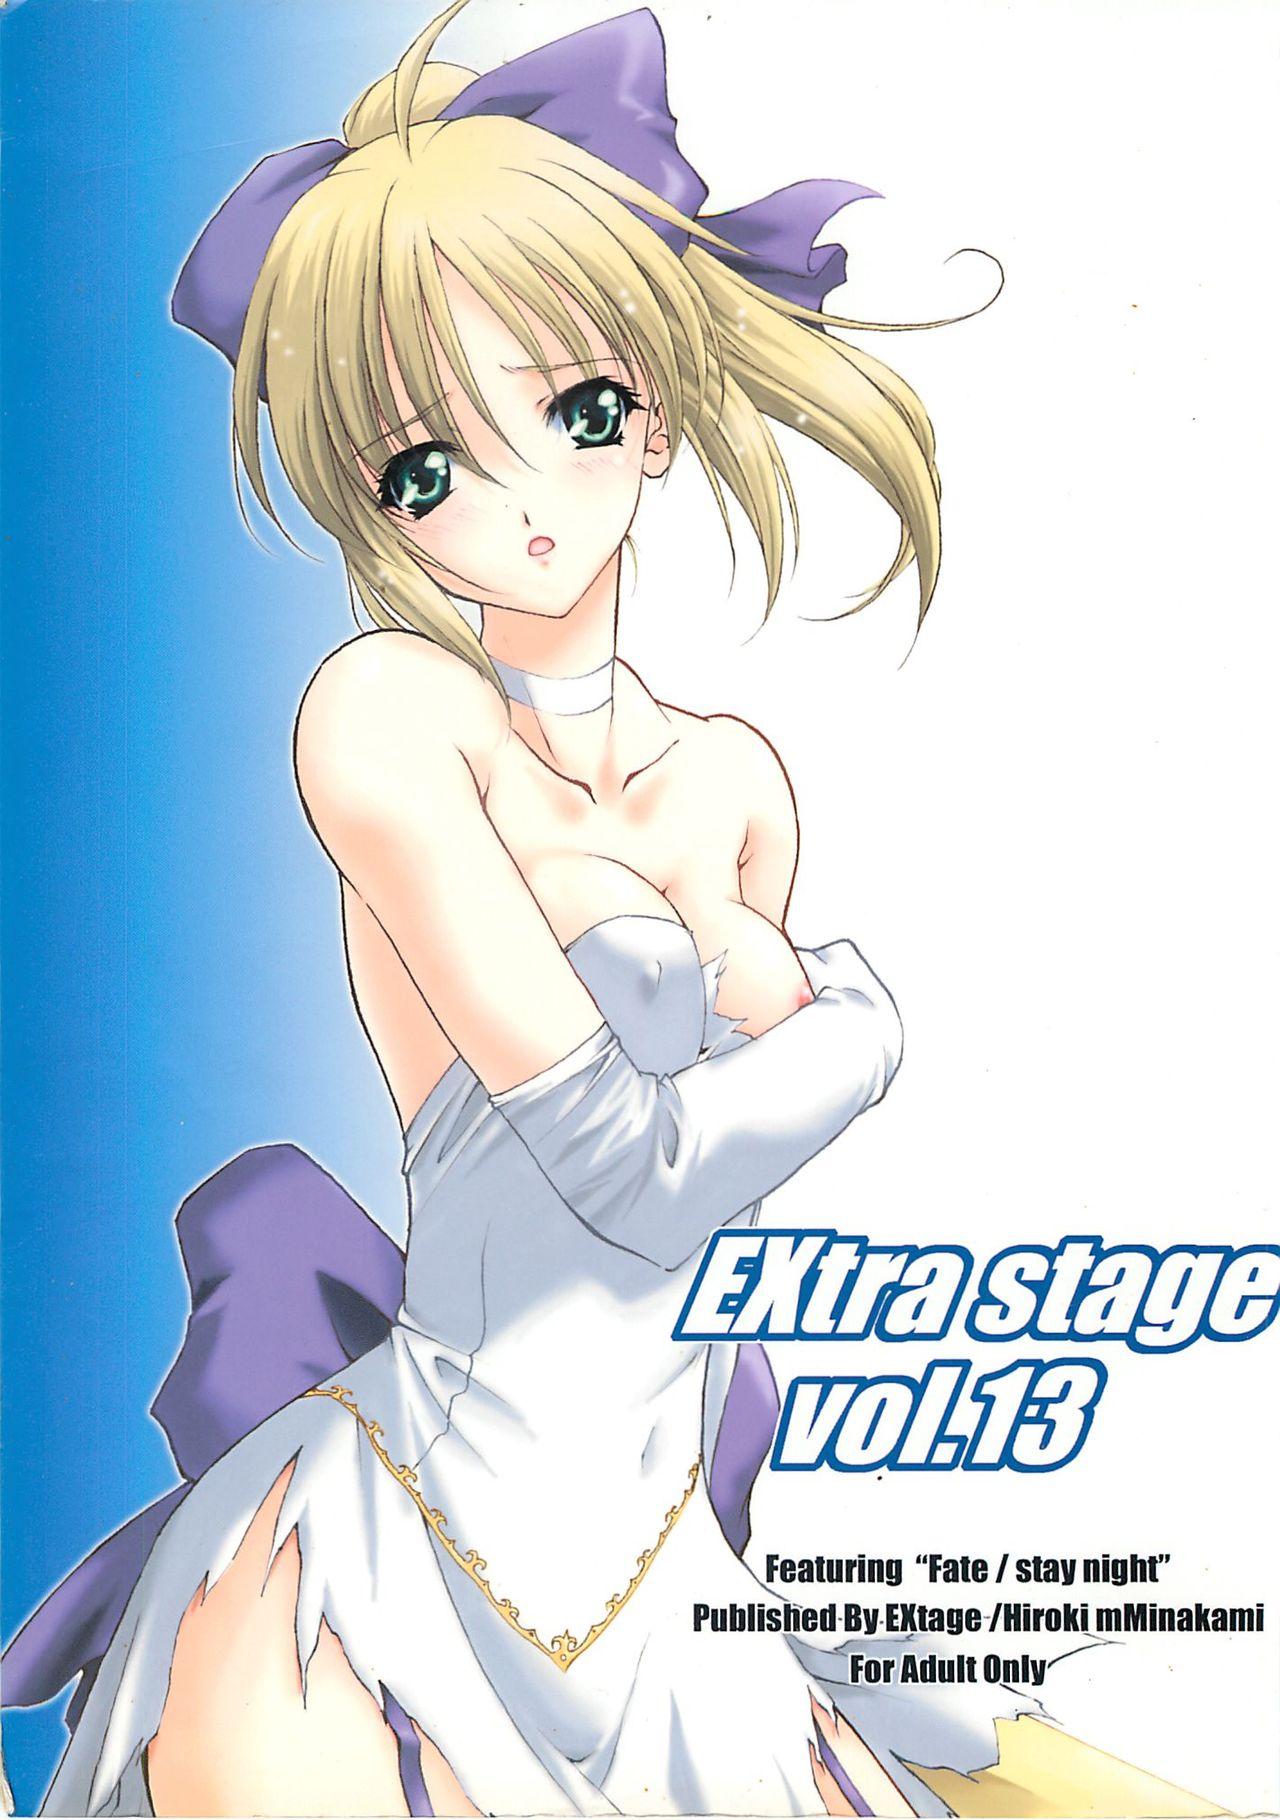 Cheat EXtra stage vol. 13 - Fate stay night Feet - Picture 1